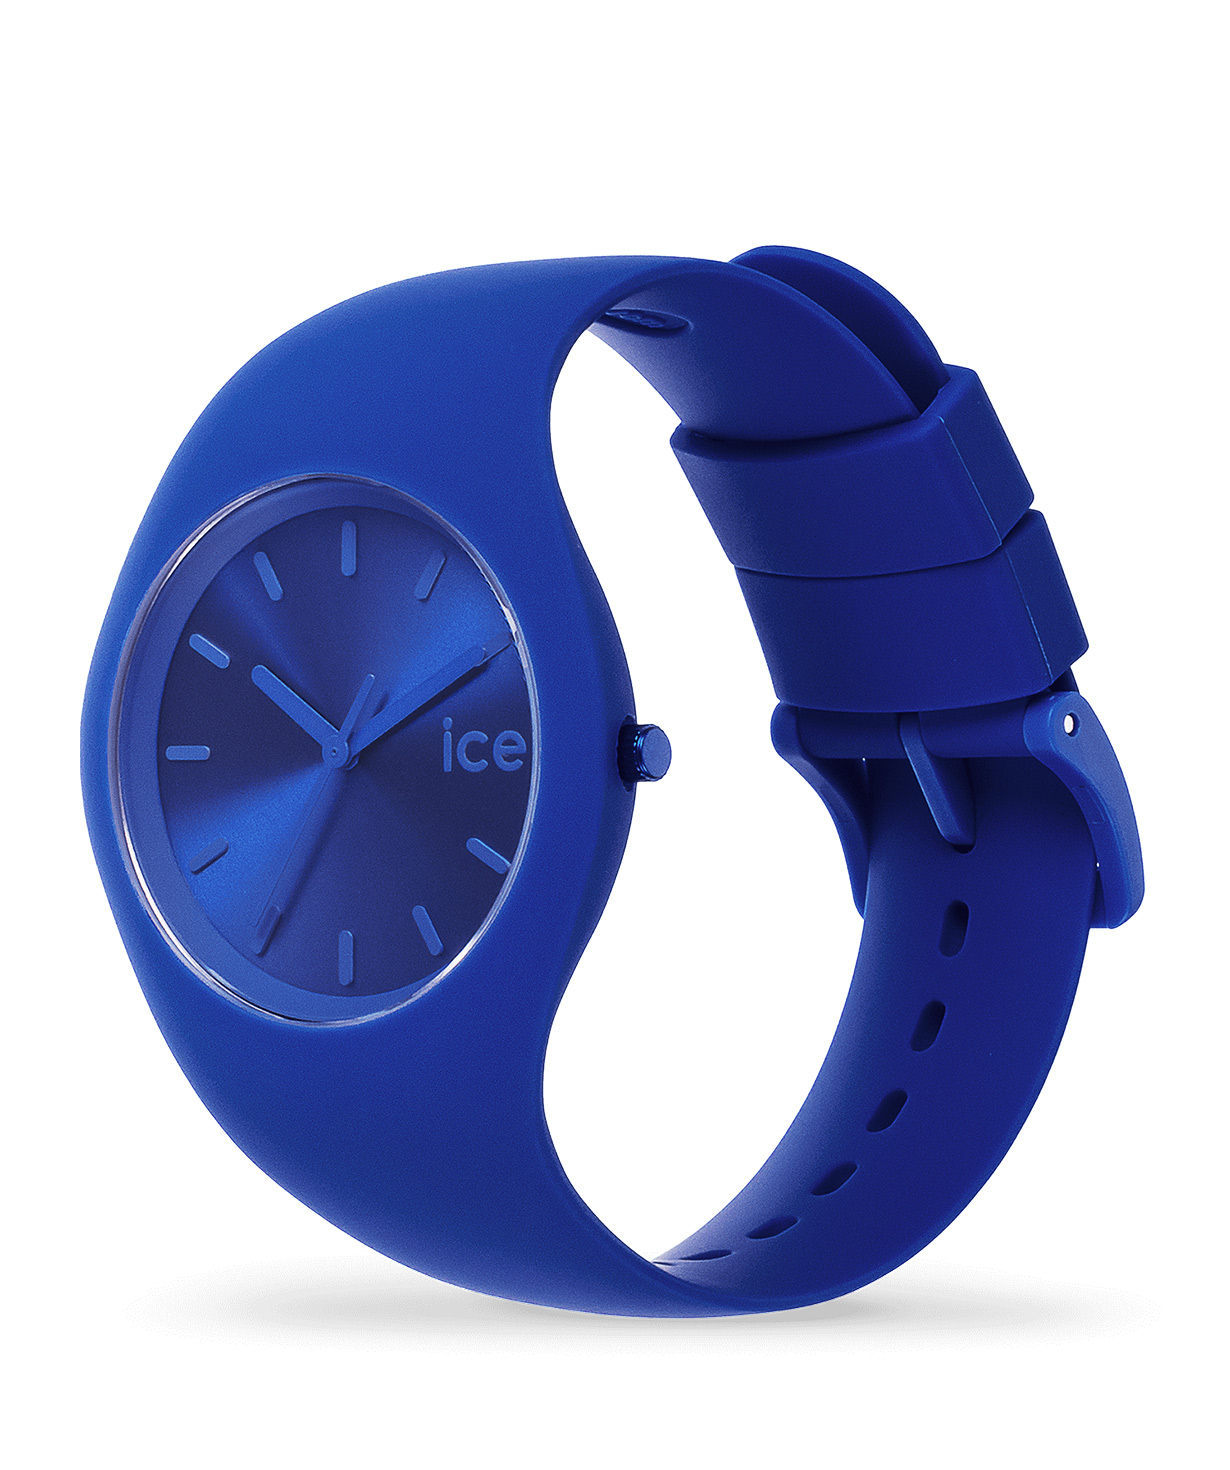 Watch `Ice-Watch` ICE colour - Royal